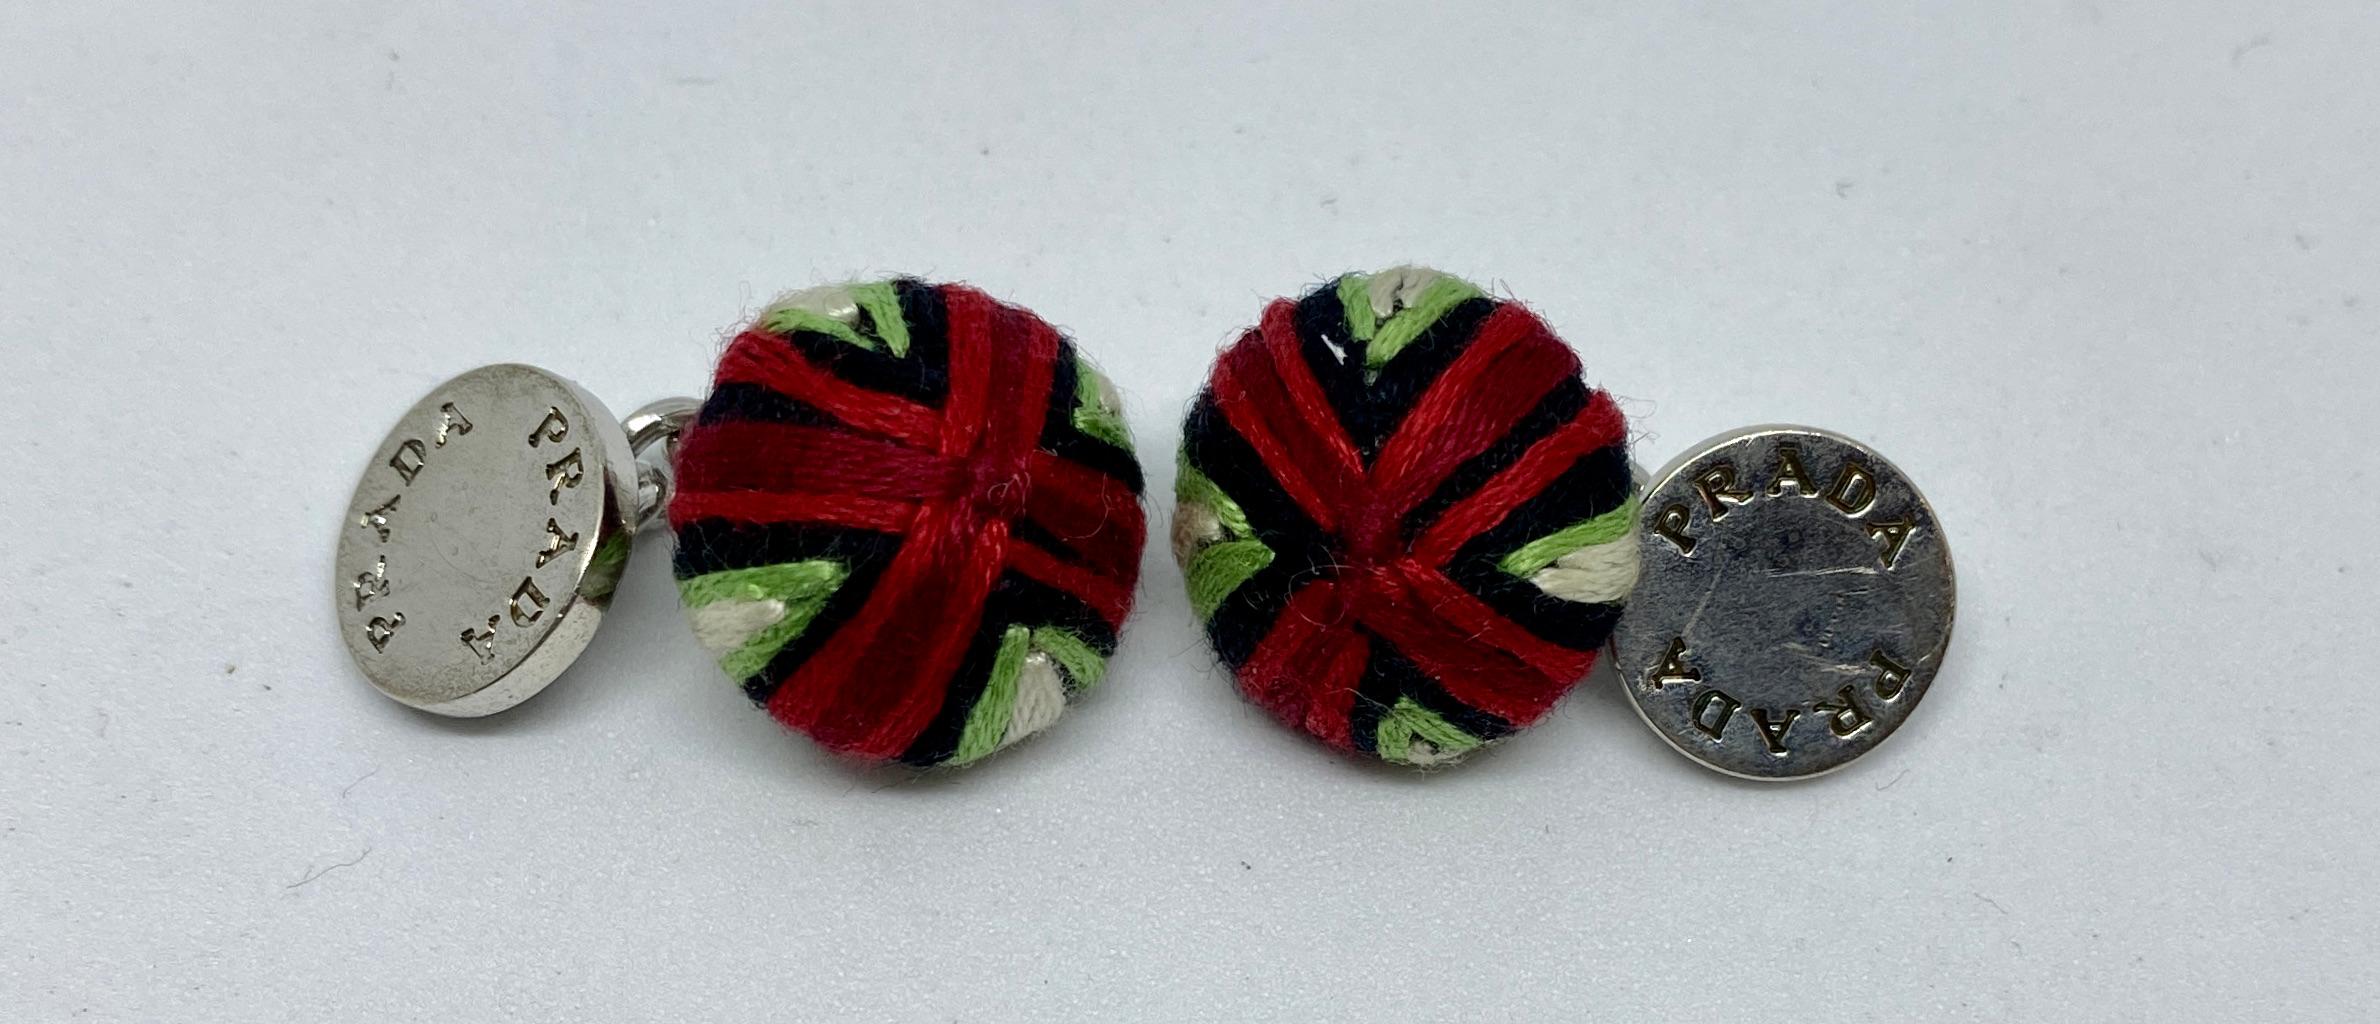 Highly original cufflinks in solid sterling silver with multicolored thread made to look like cloth buttons. 

The cufflink faces measure 15.7mm in diameter and feature an X pattern in dark and light red, black, green and white. The faces are